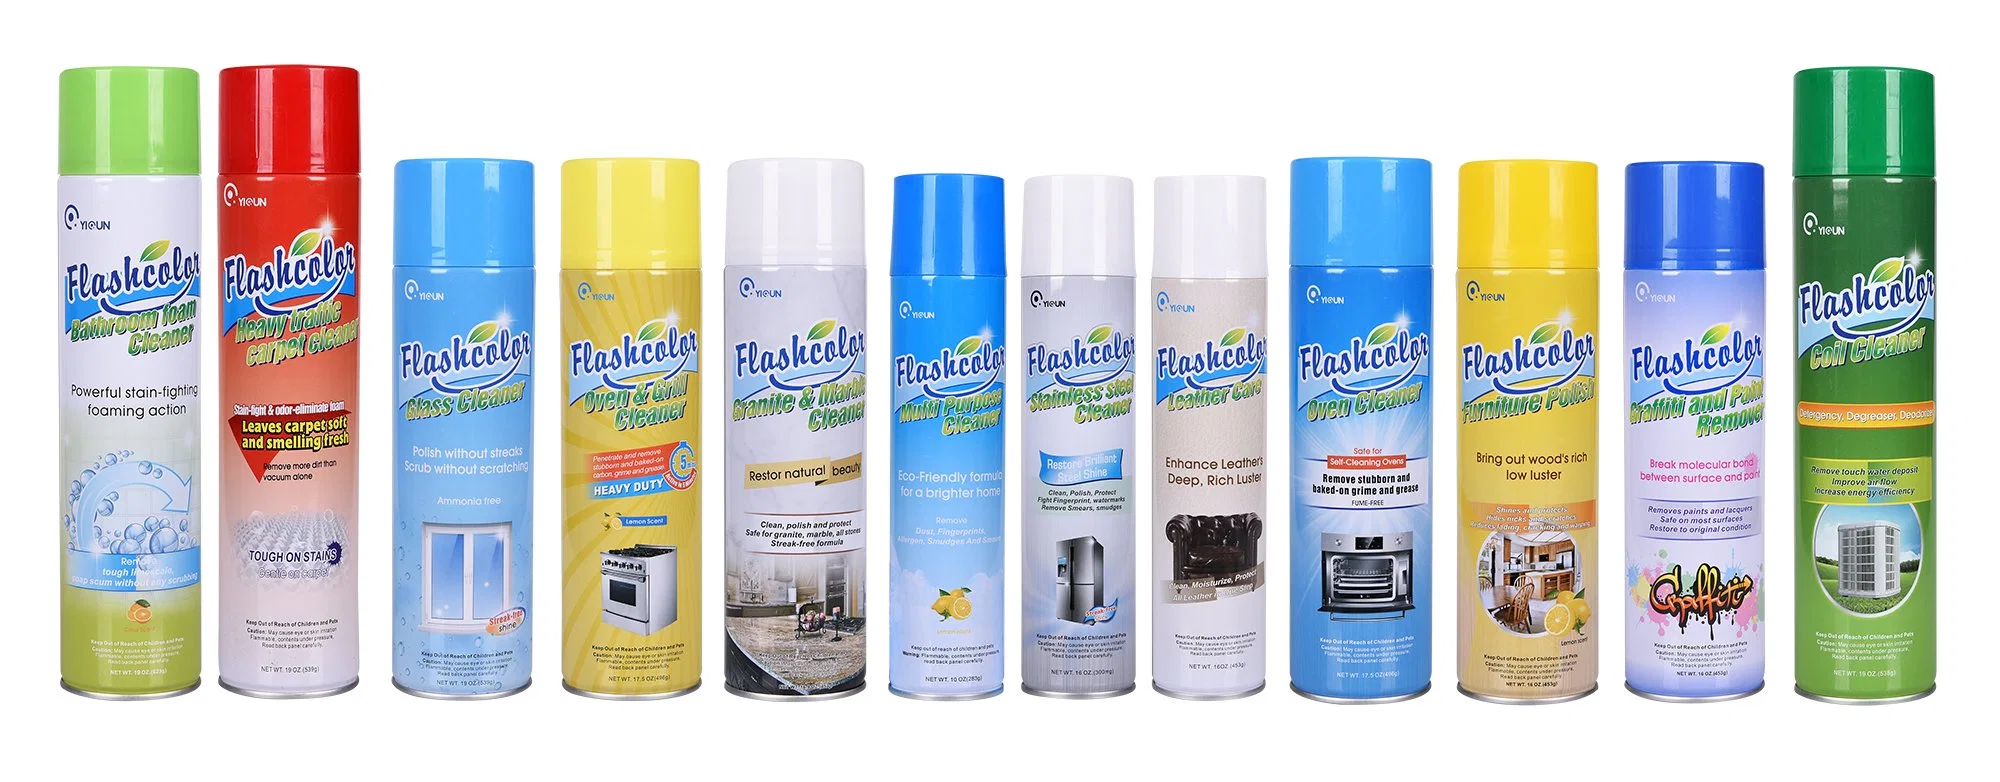 Household Care Cleaning Spray for Granite and Marble Cleaners